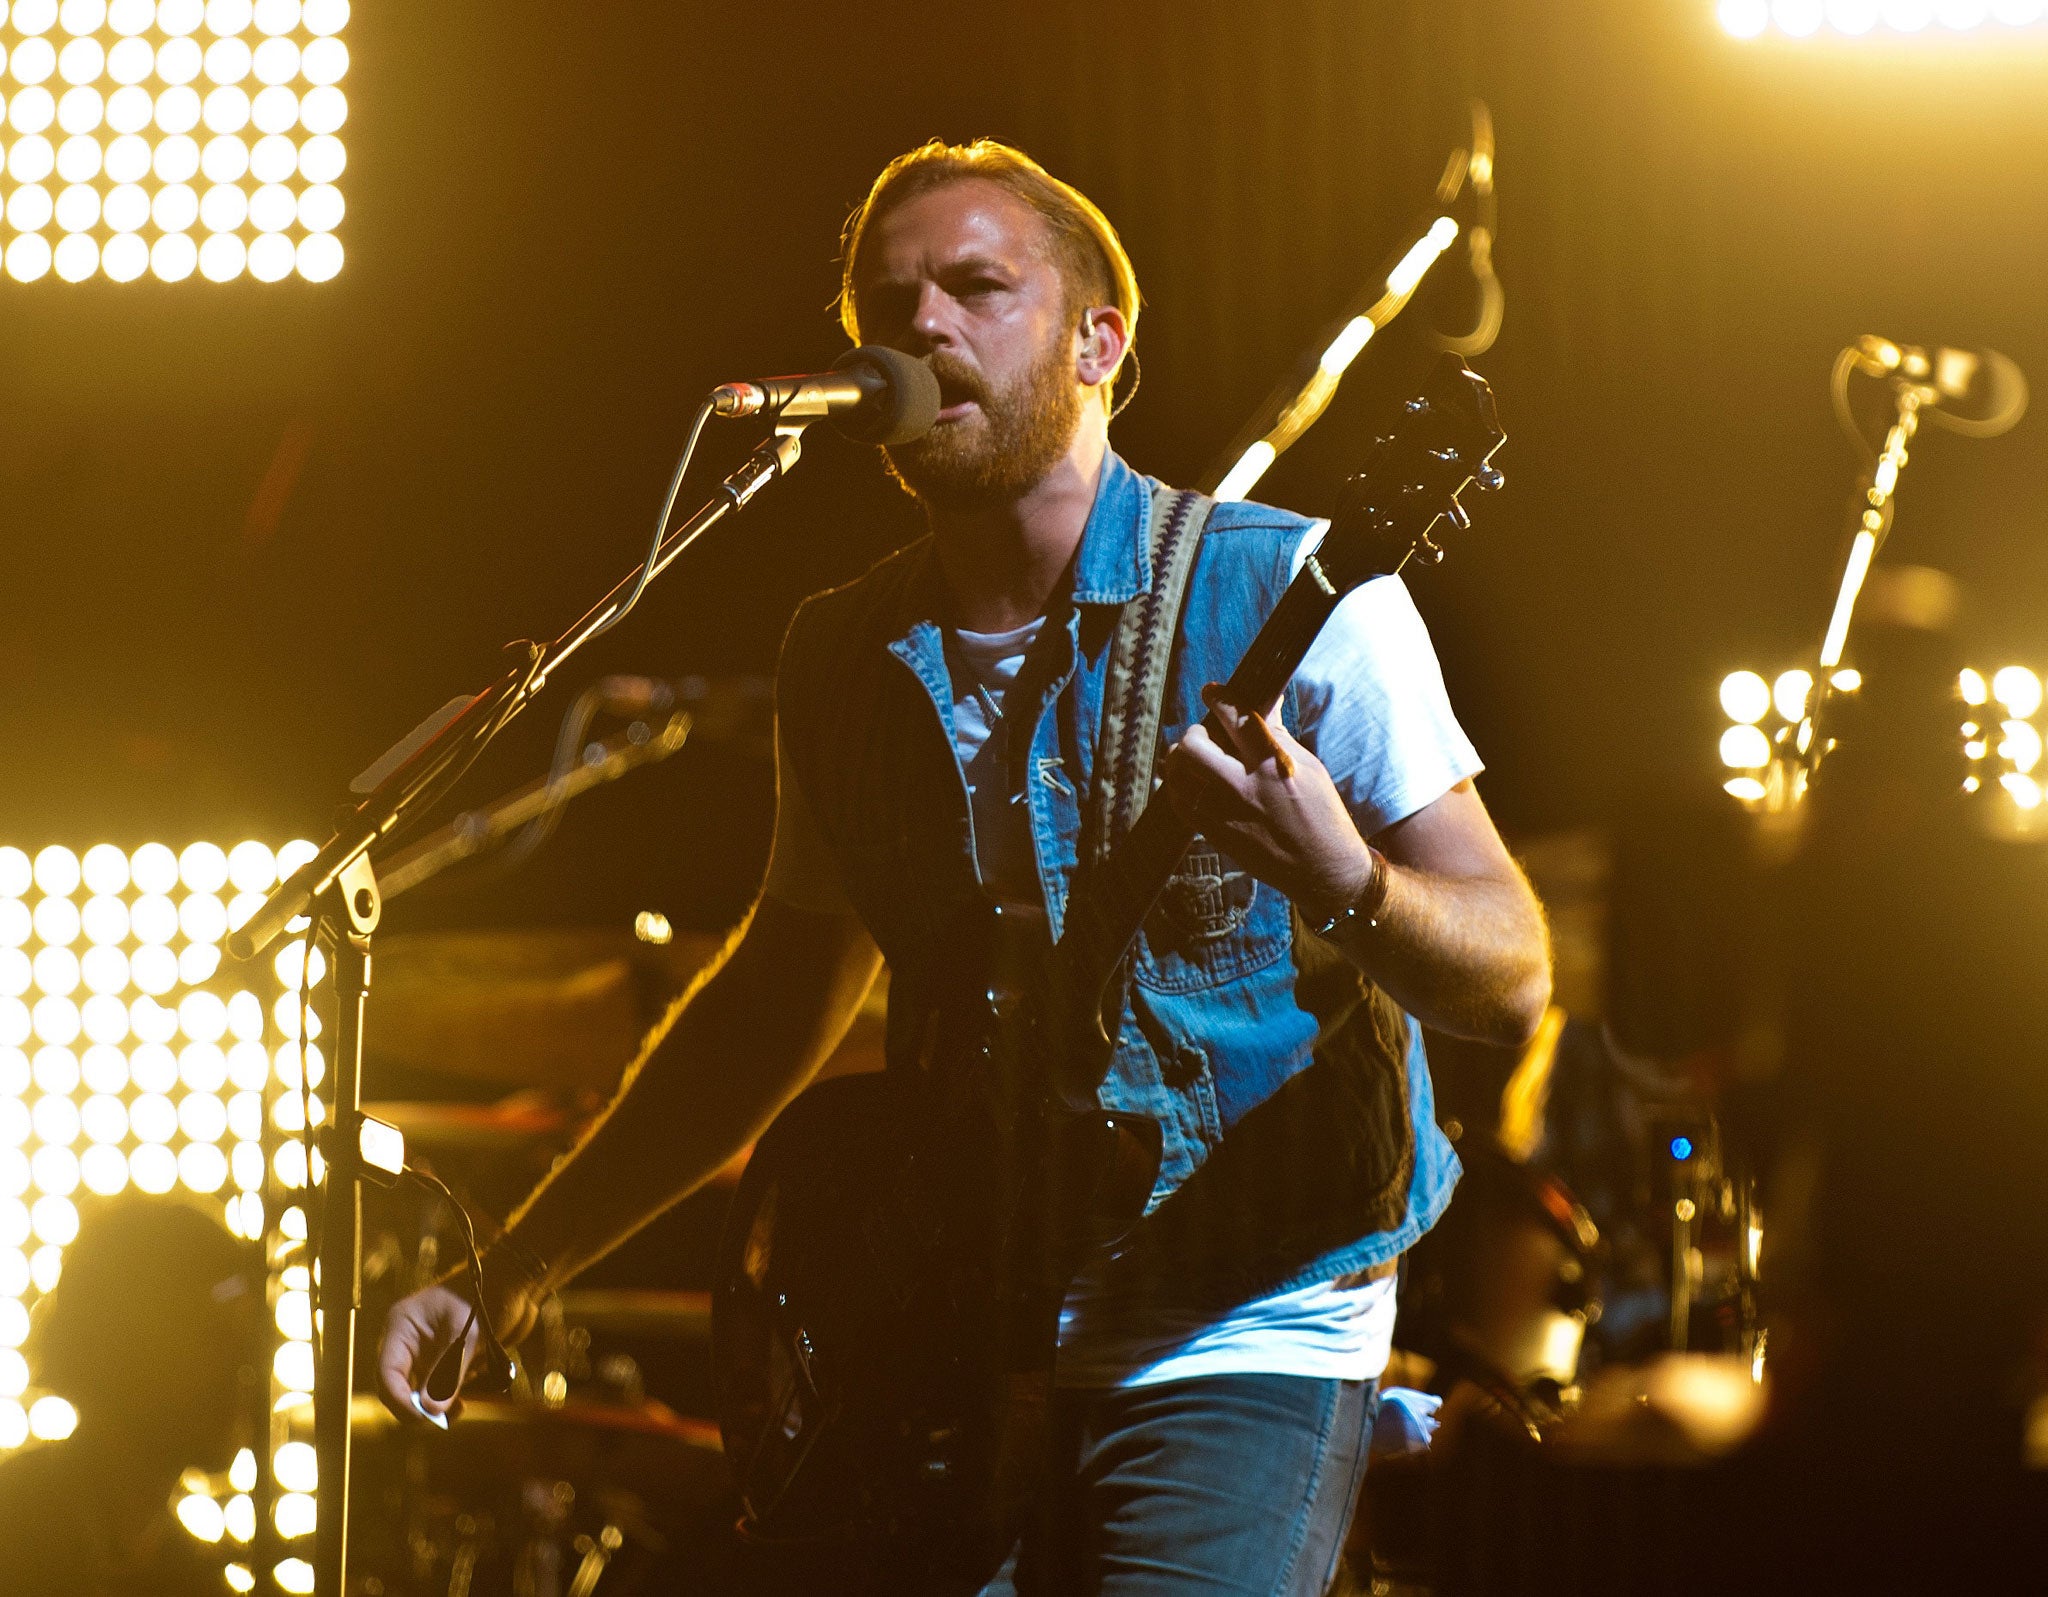 Kings of Leon front man Caleb Followill. Let's hope the band have all had their vaccines